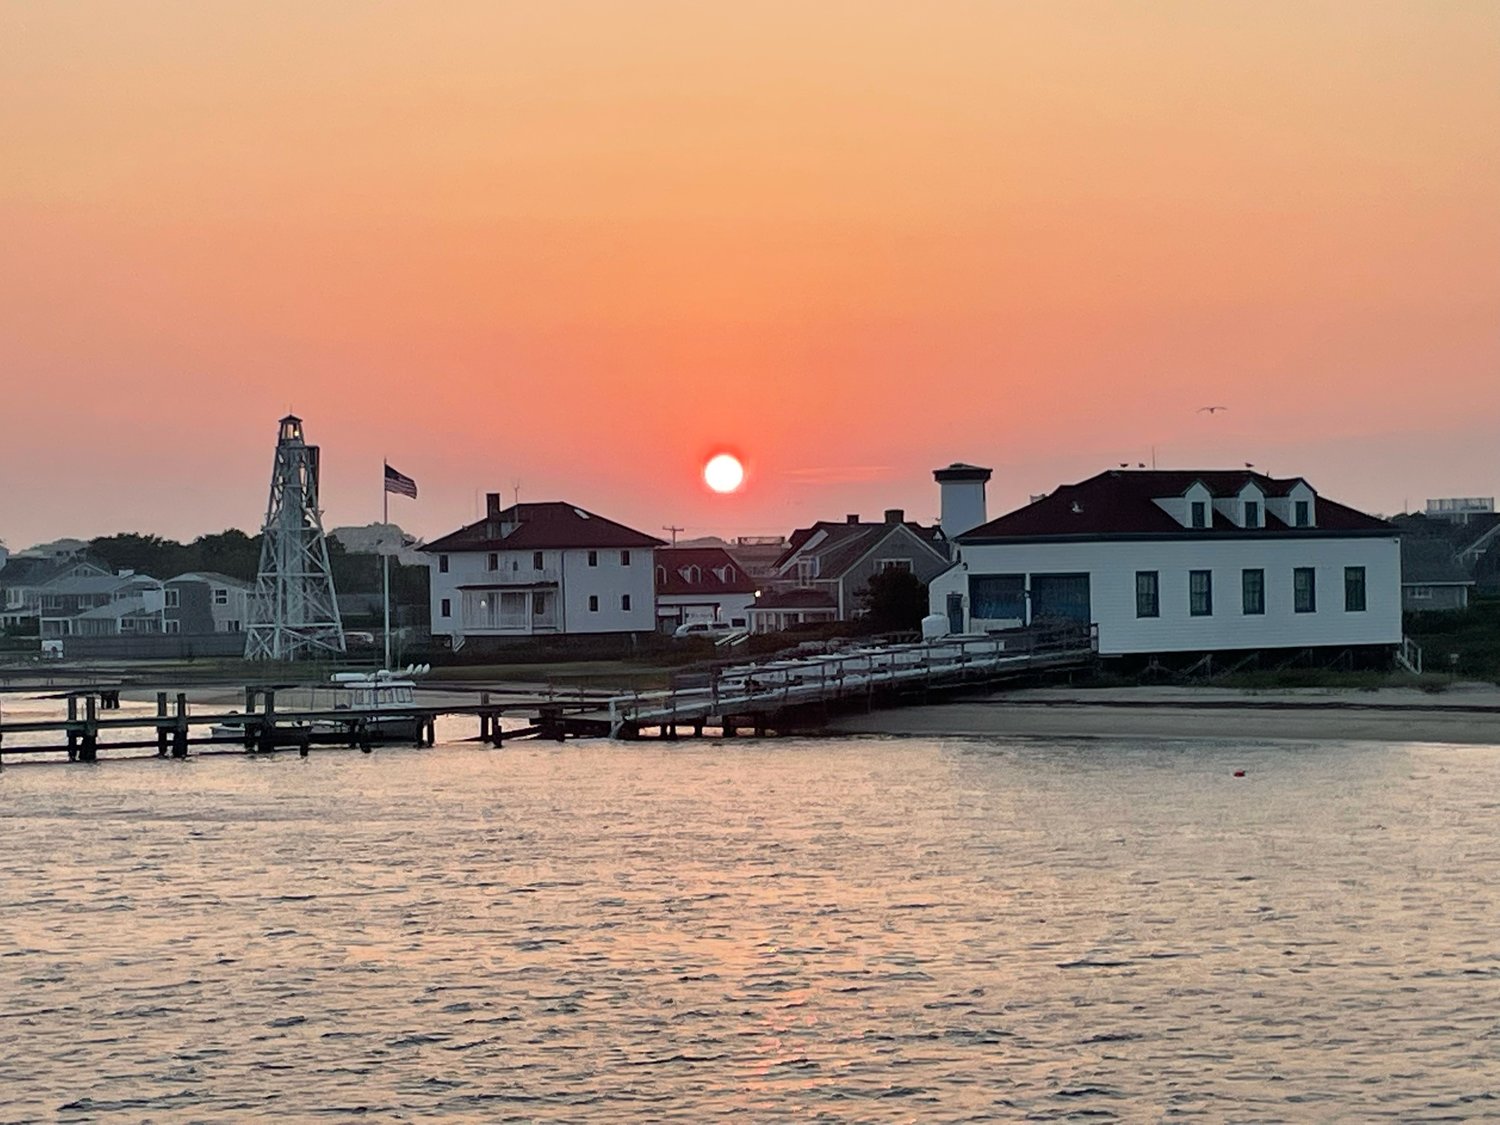 The sun sets over Brant Point as seen from the departing ferry.